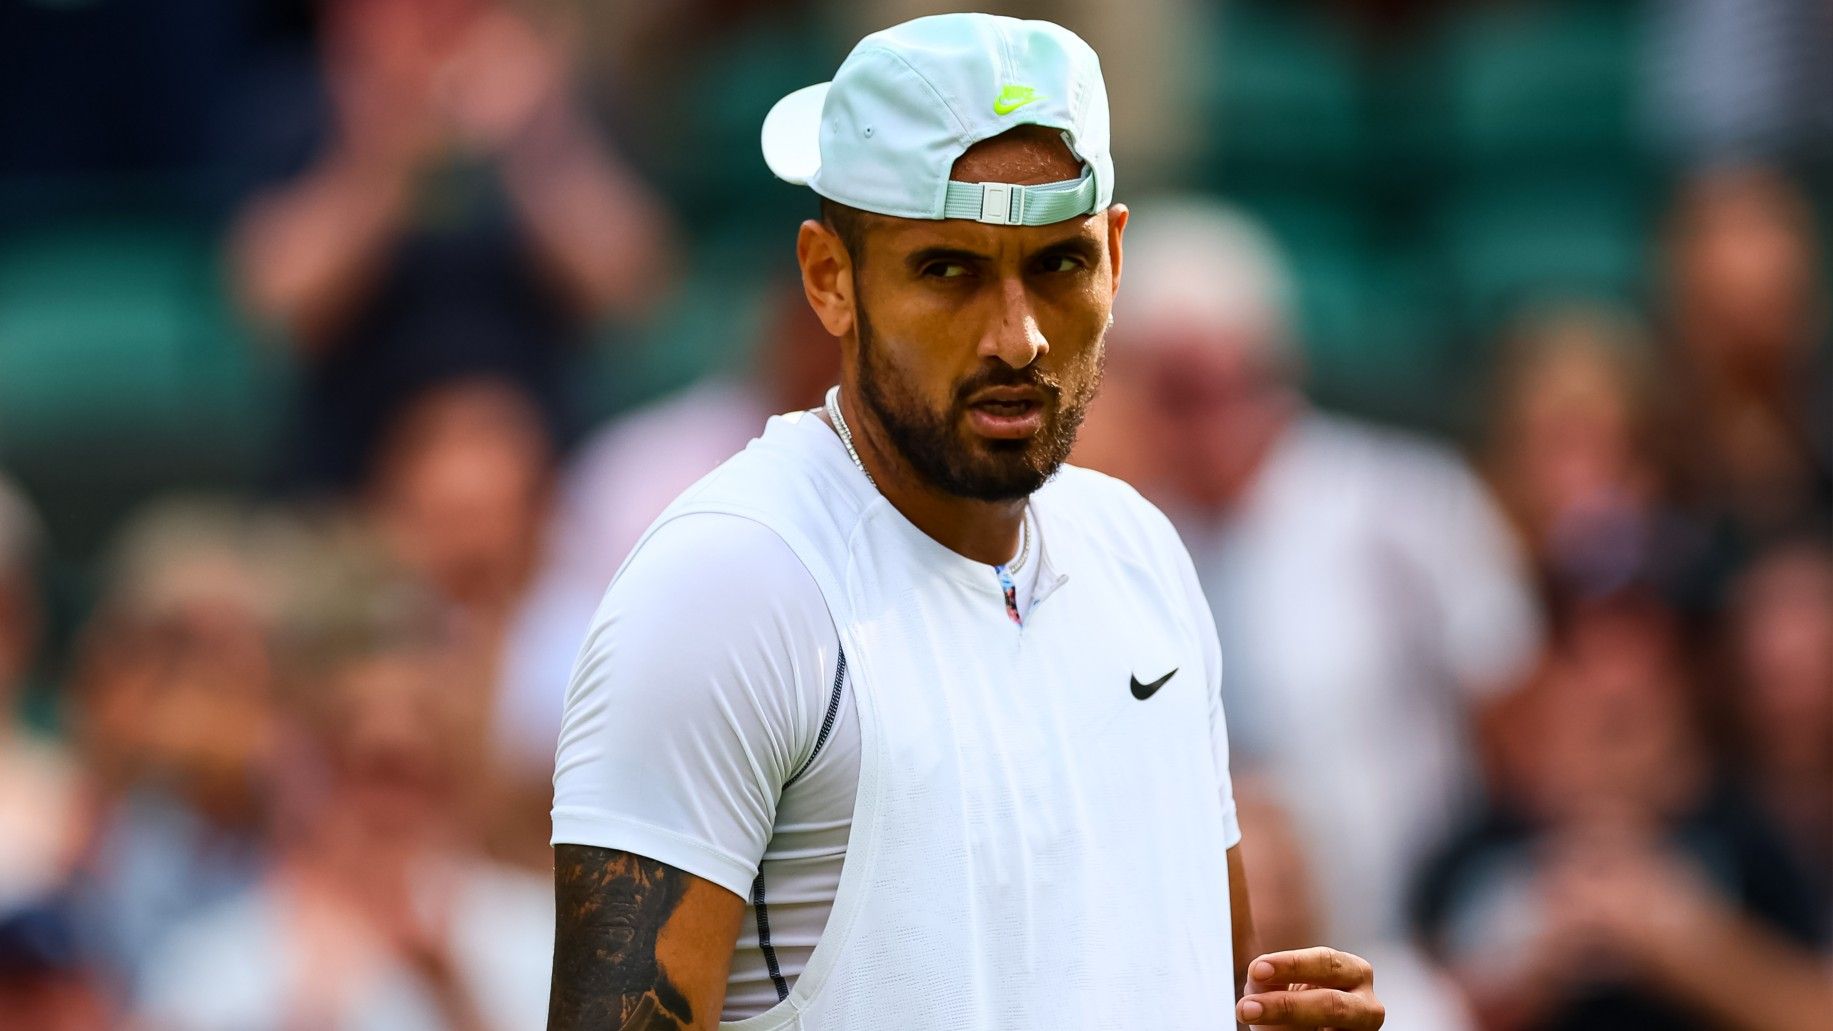 How to watch Wimbledon men's singles final 2022 - live and free